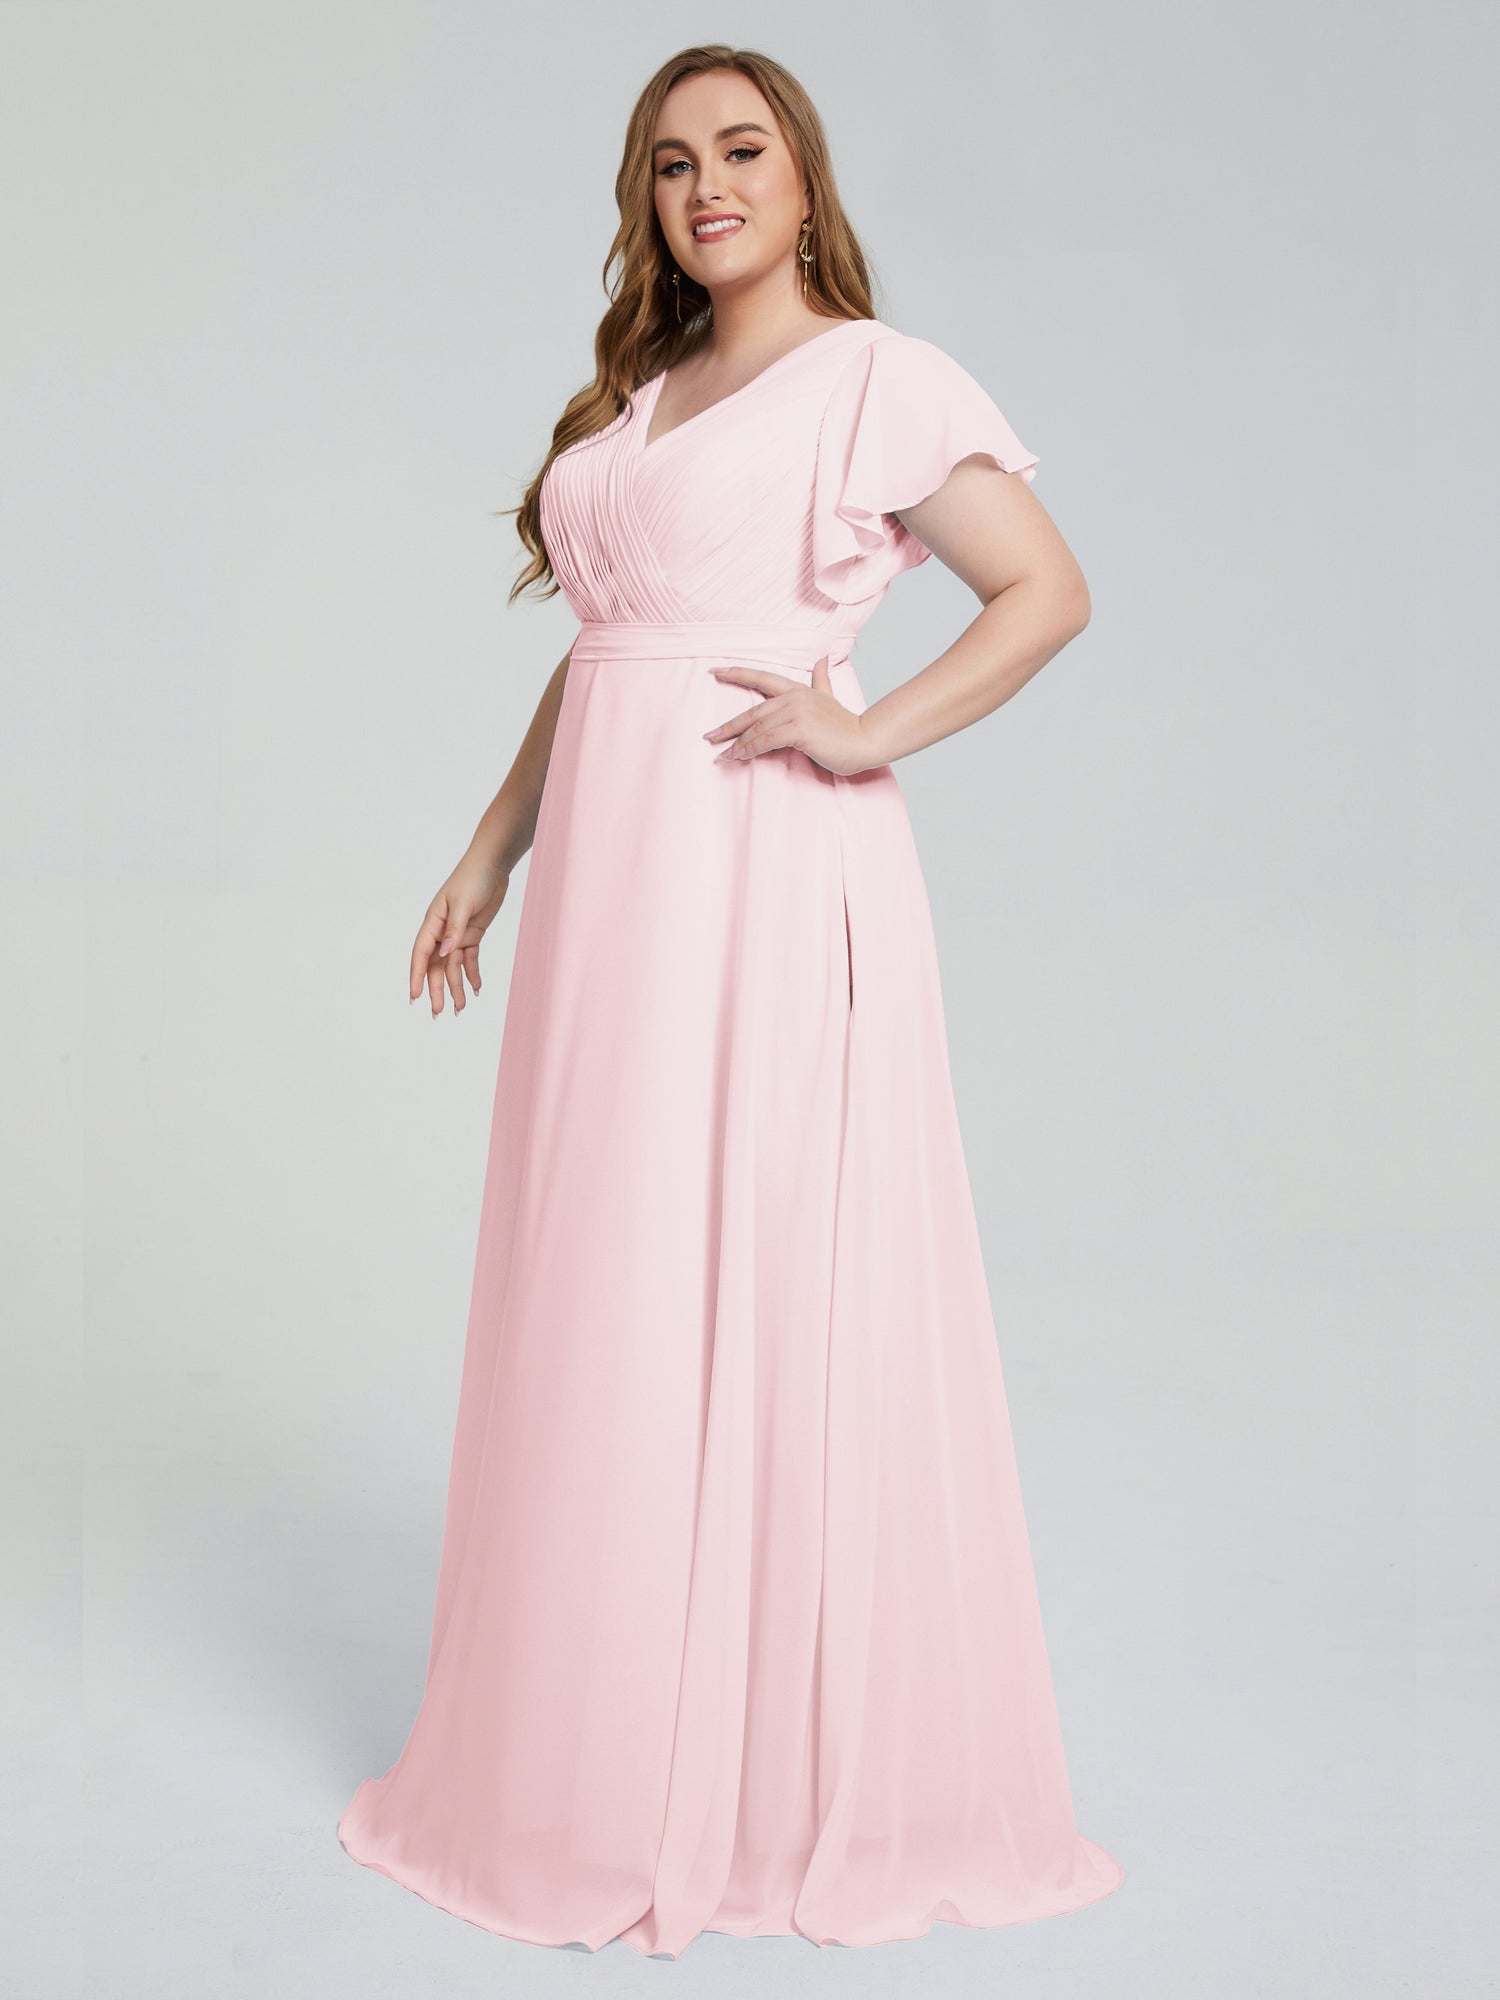 Plus Size Blush Bridesmaid Dresses From $99